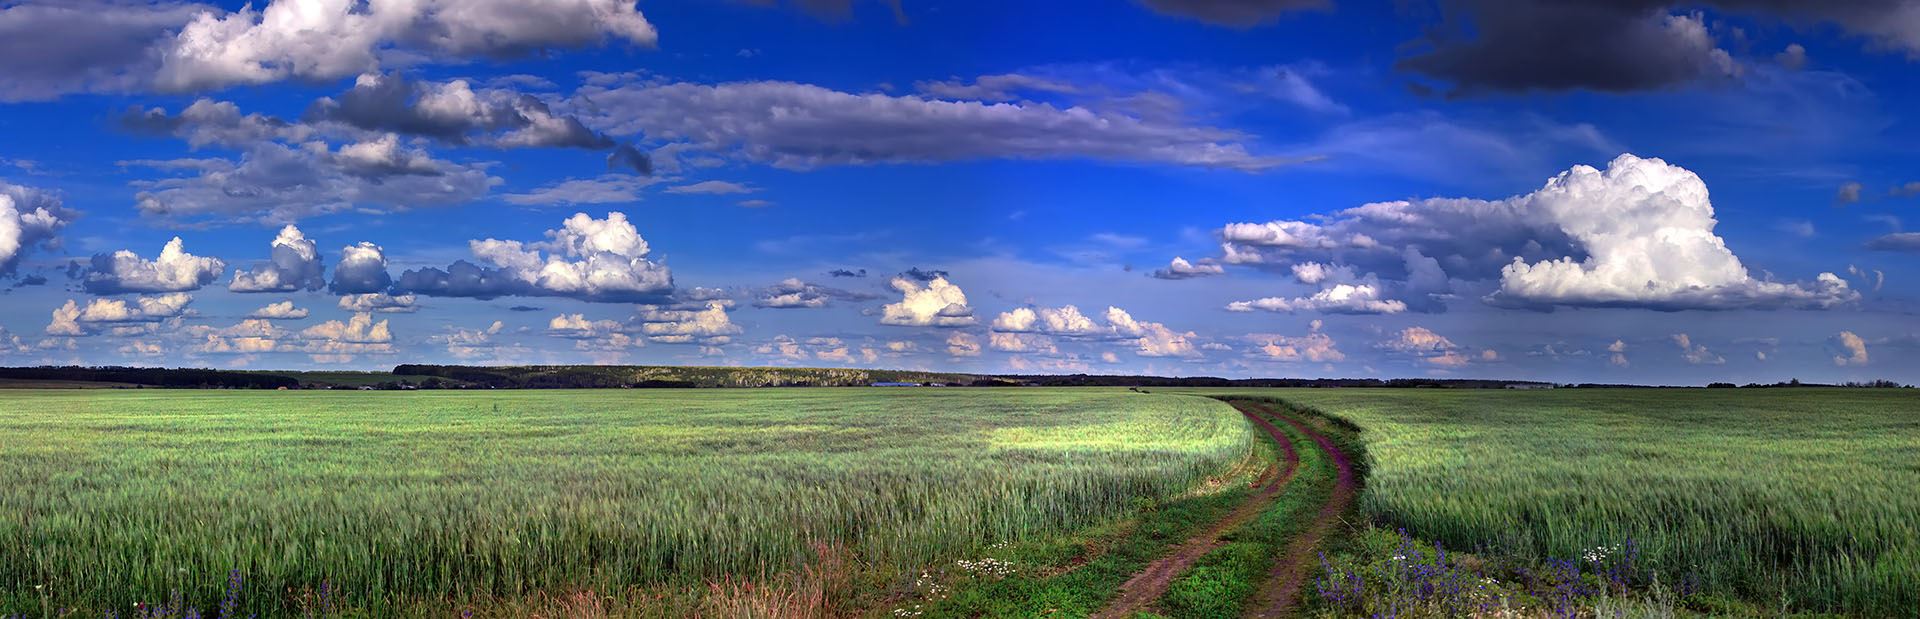 dirt road through a green field with a bright blue sky